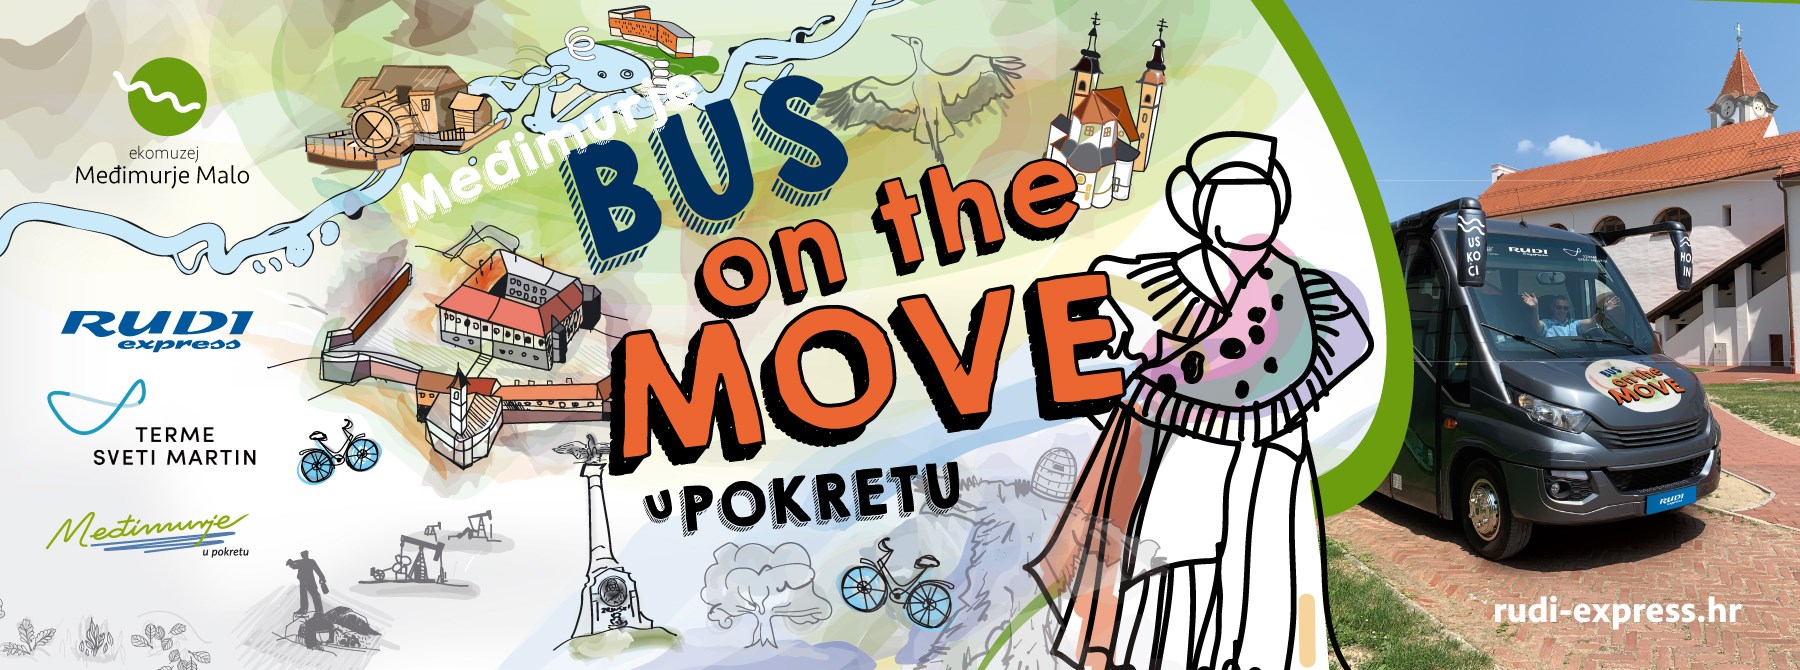 bus-on-the-move-2.jpg